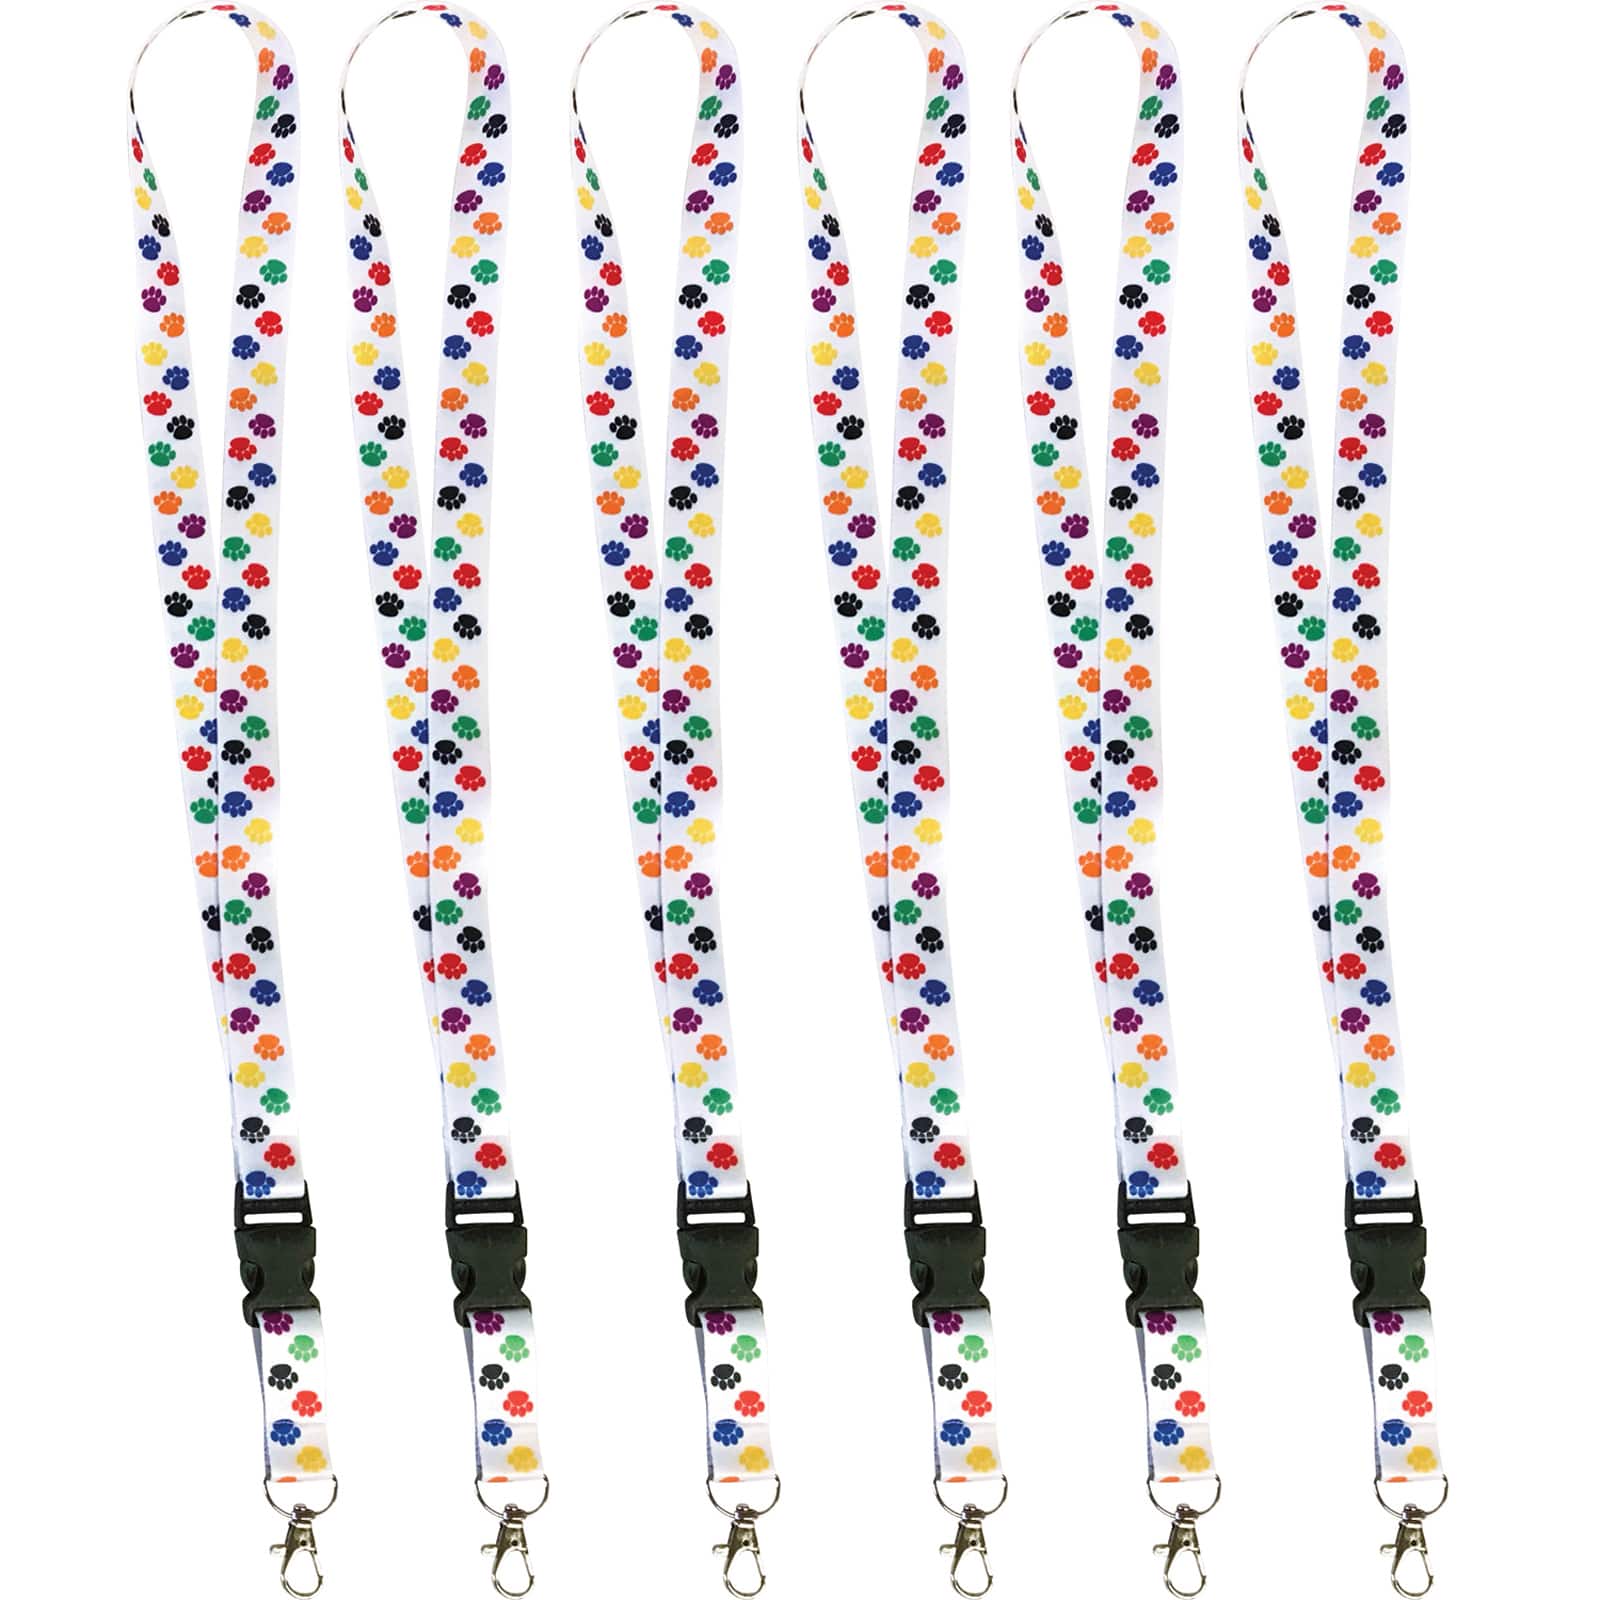 Teacher Created Resources Colorful Paw Print Lanyard, 6ct.